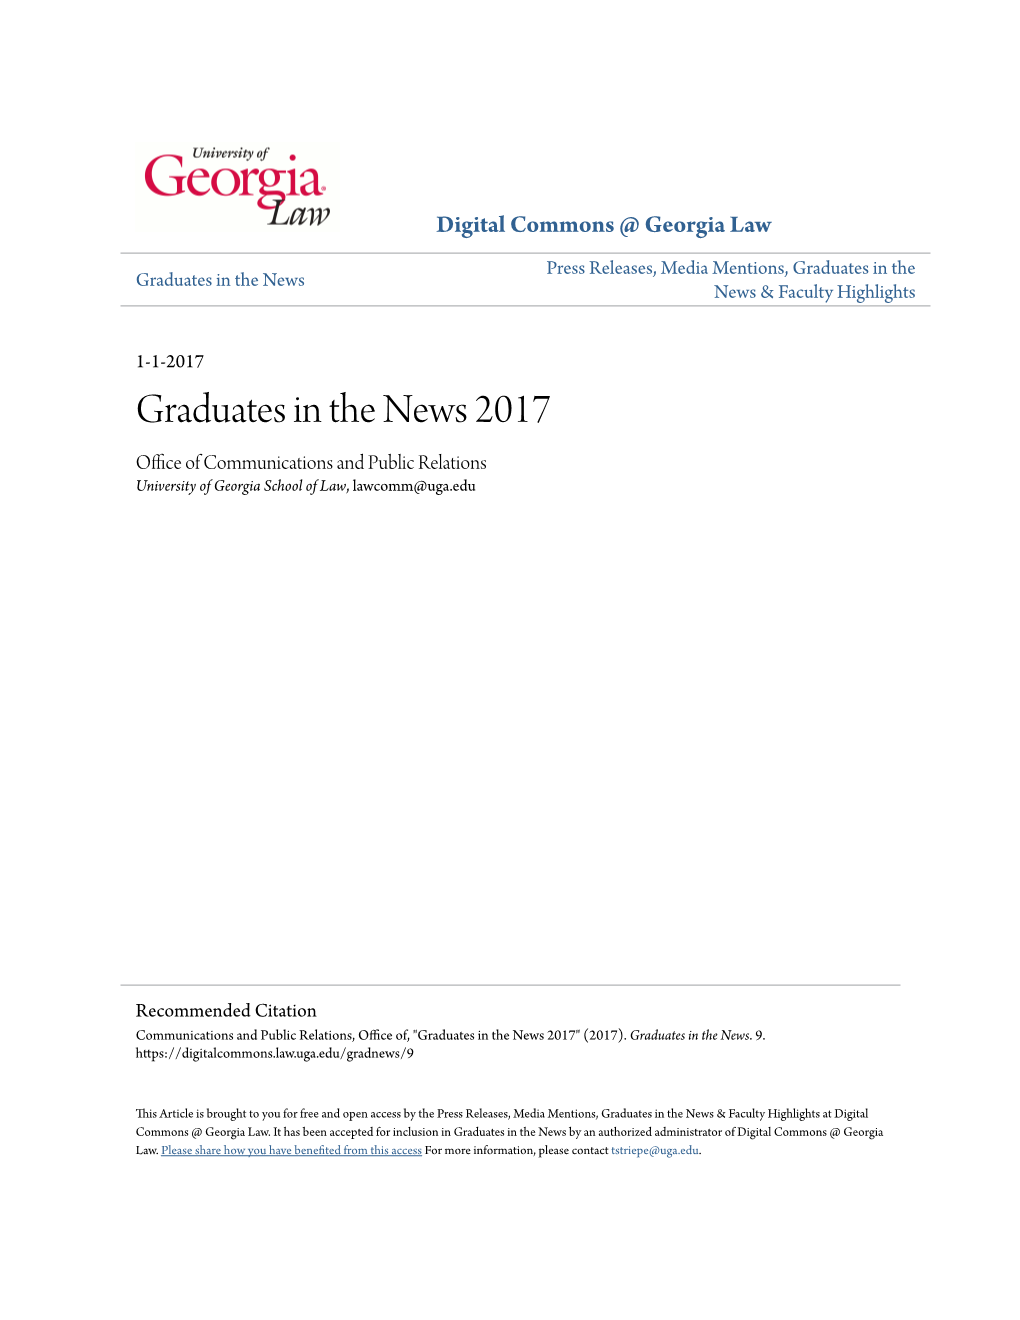 Graduates in the News 2017 Office Ofomm C Unications and Public Relations University of Georgia School of Law, Lawcomm@Uga.Edu